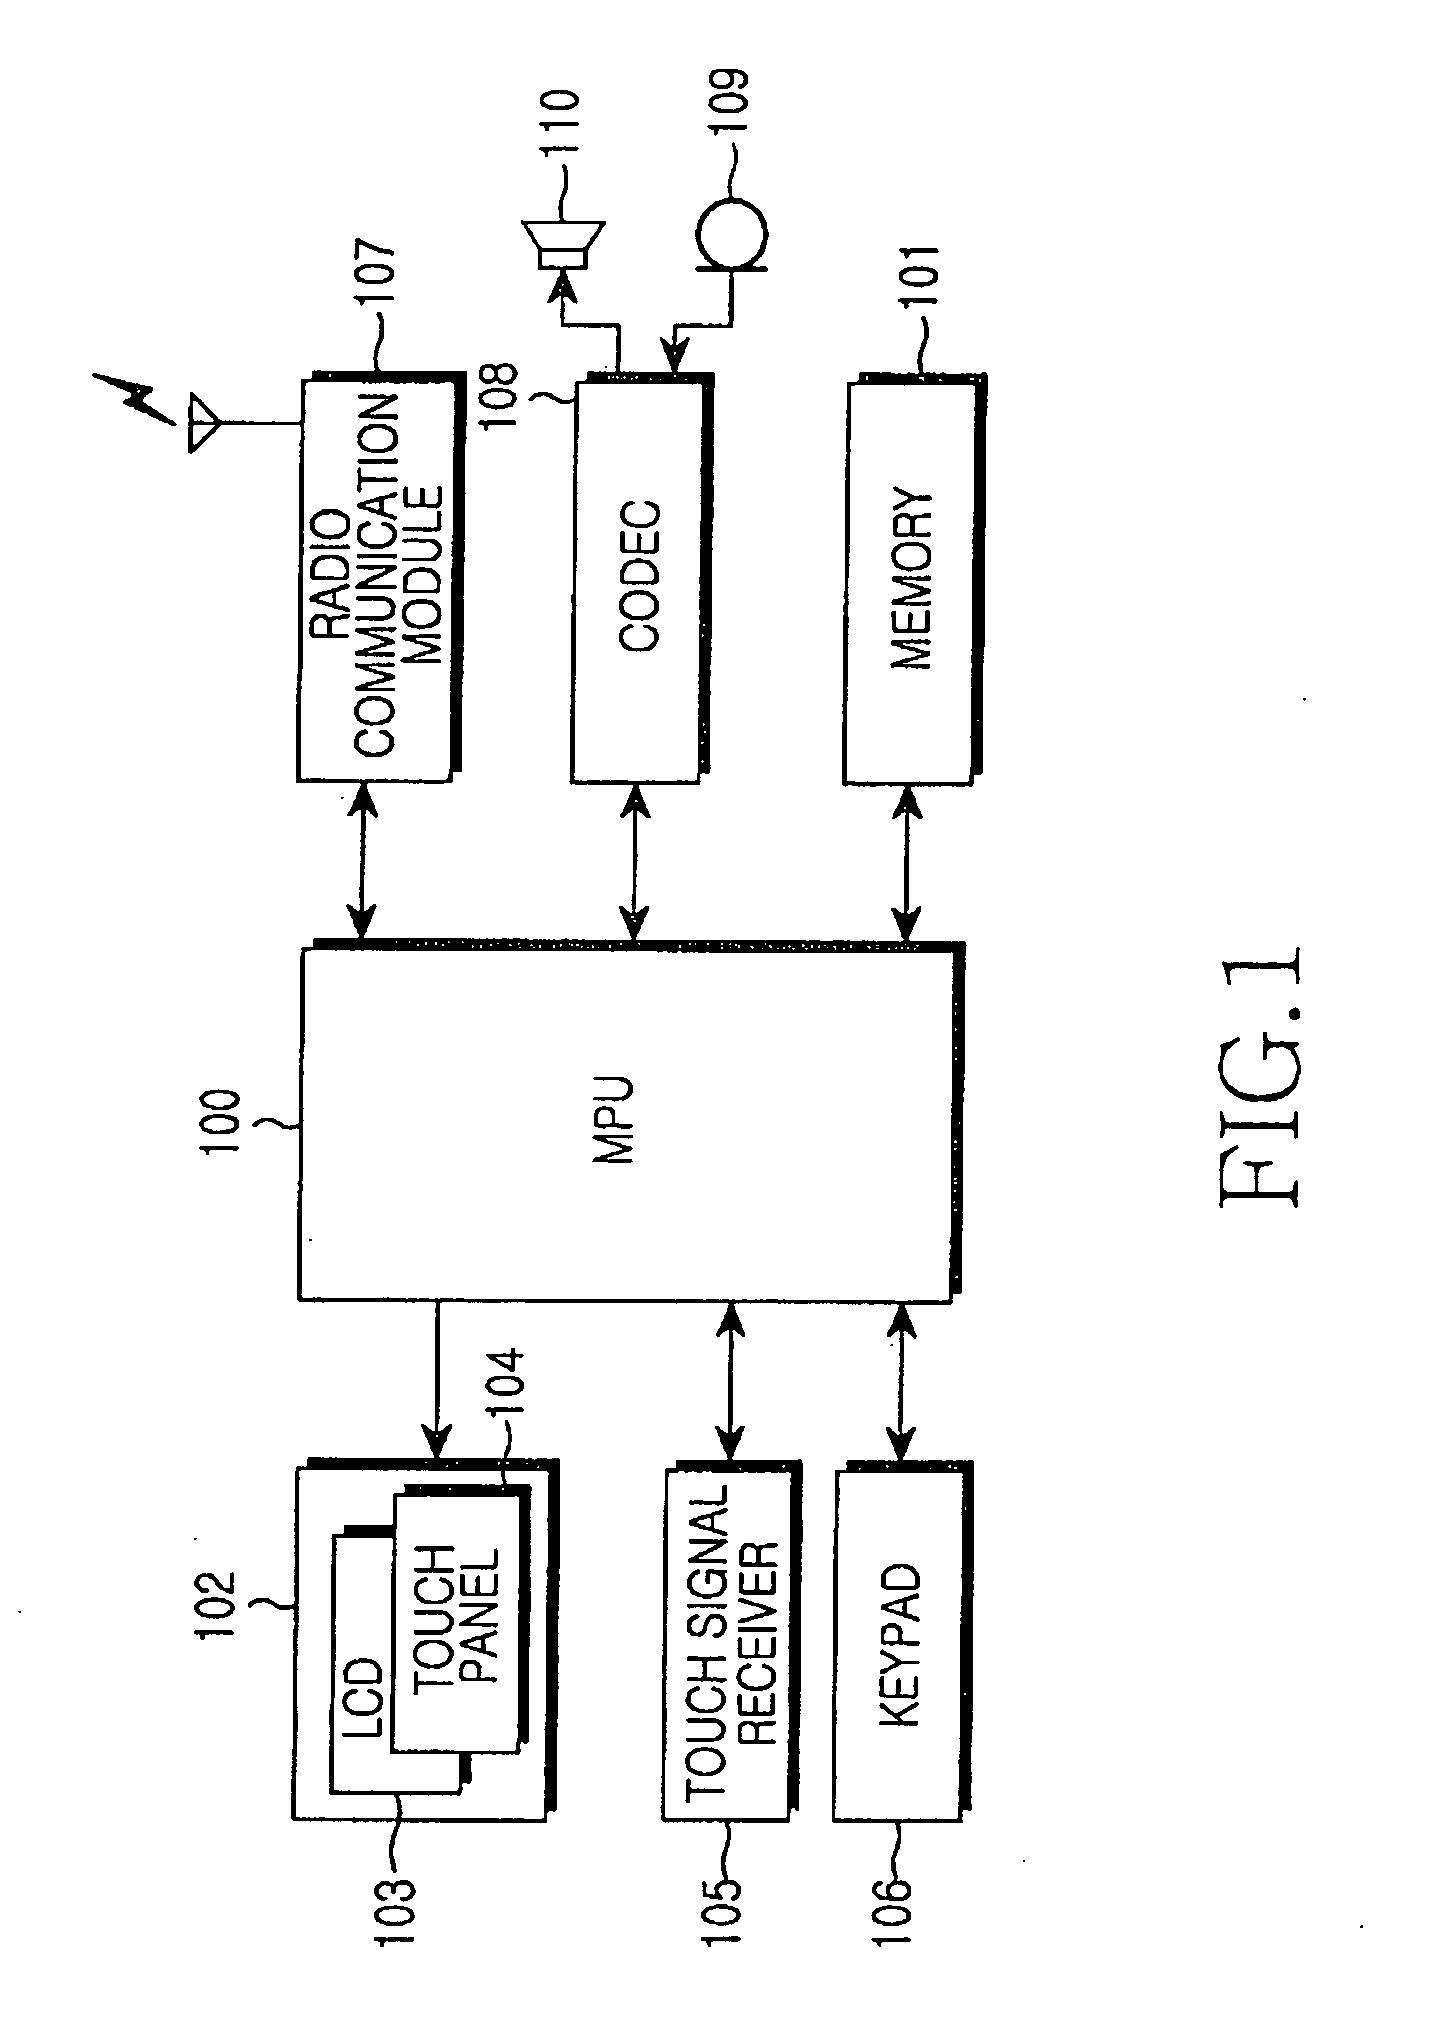 Apparatus and method for inputting character using touch screen in portable terminal